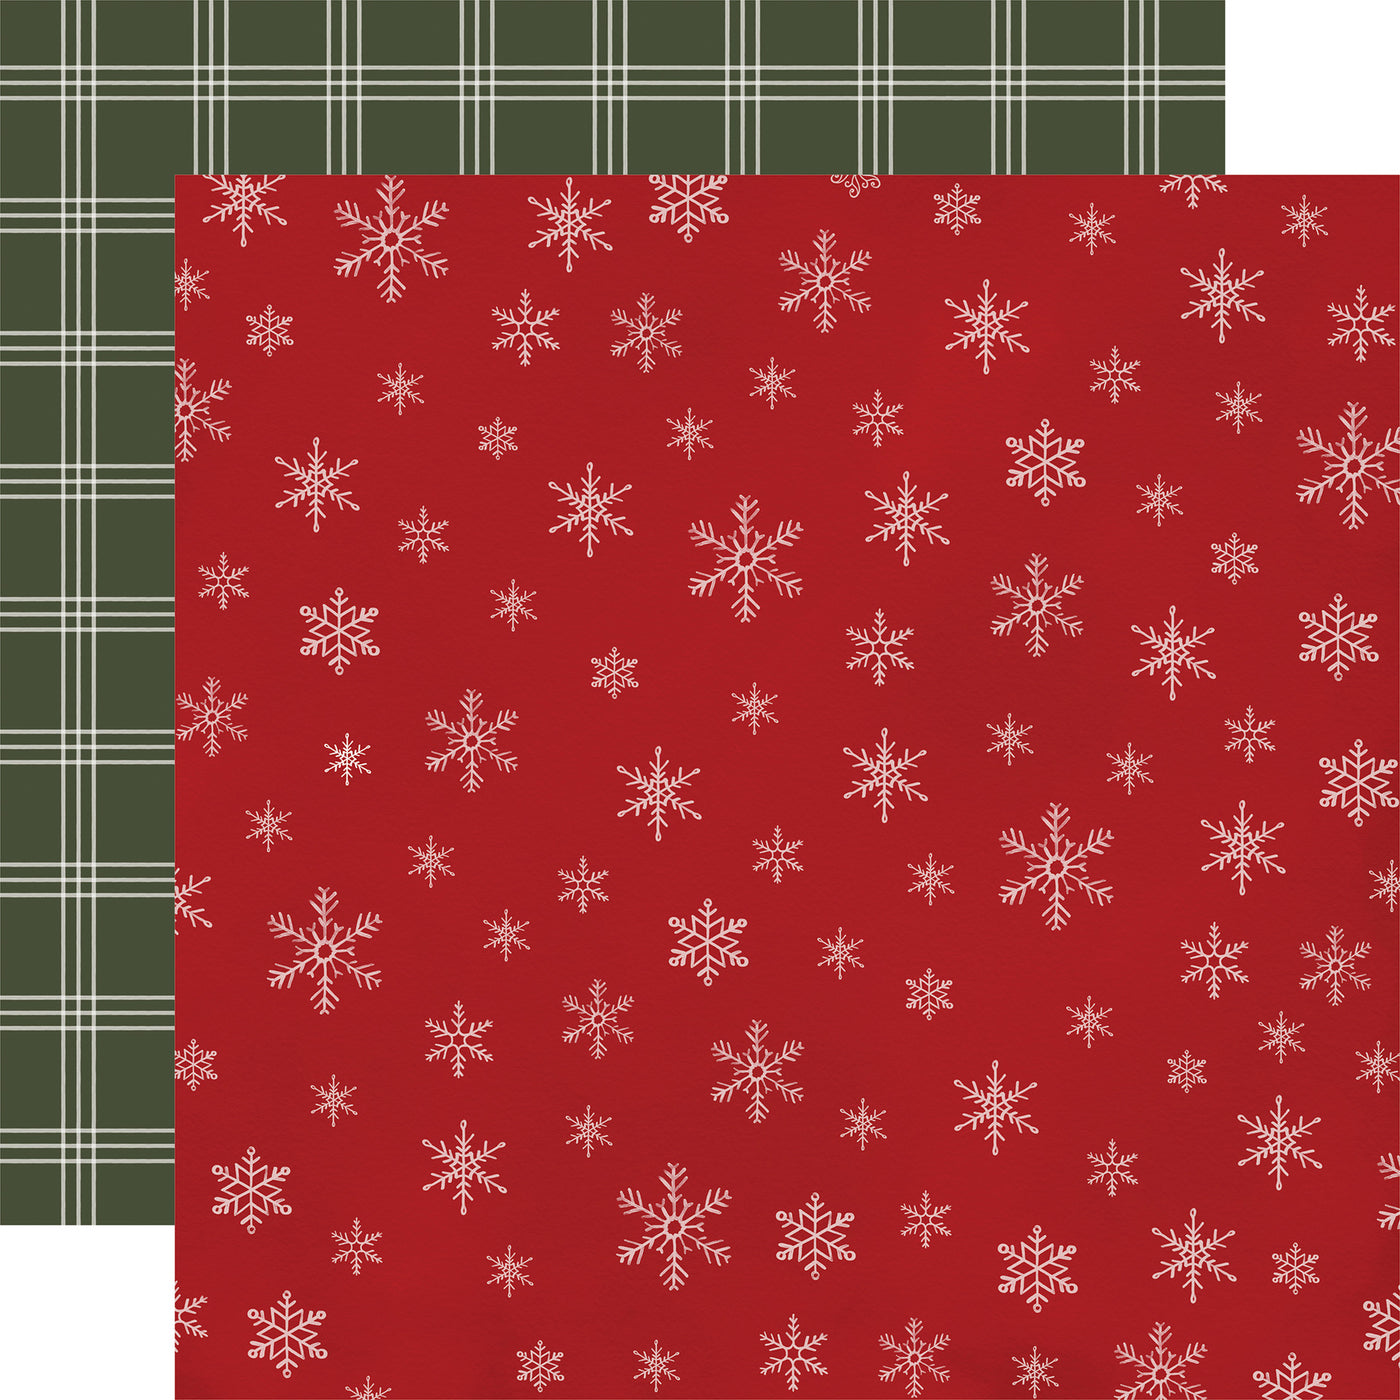 Double-sided 12x12 cardstock with white snowflakes on a red background; the reverse is white plaid on a green background. 80 lb cover. Felt texture.